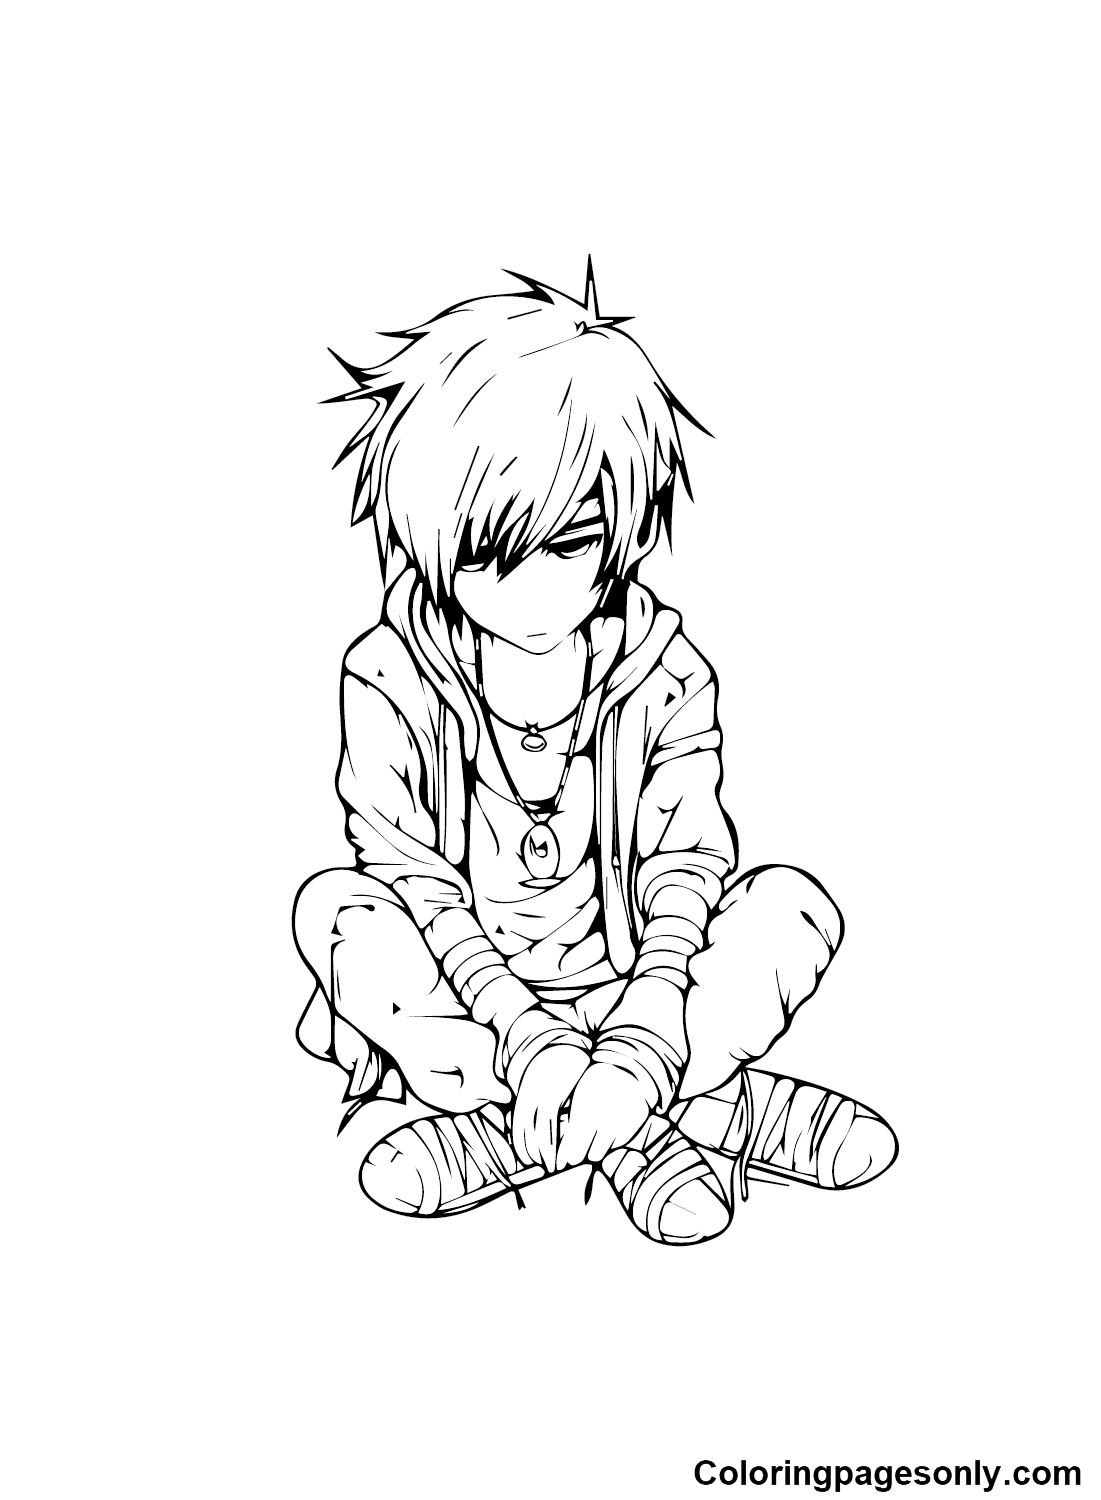 Emo color Sheets Coloring Pages